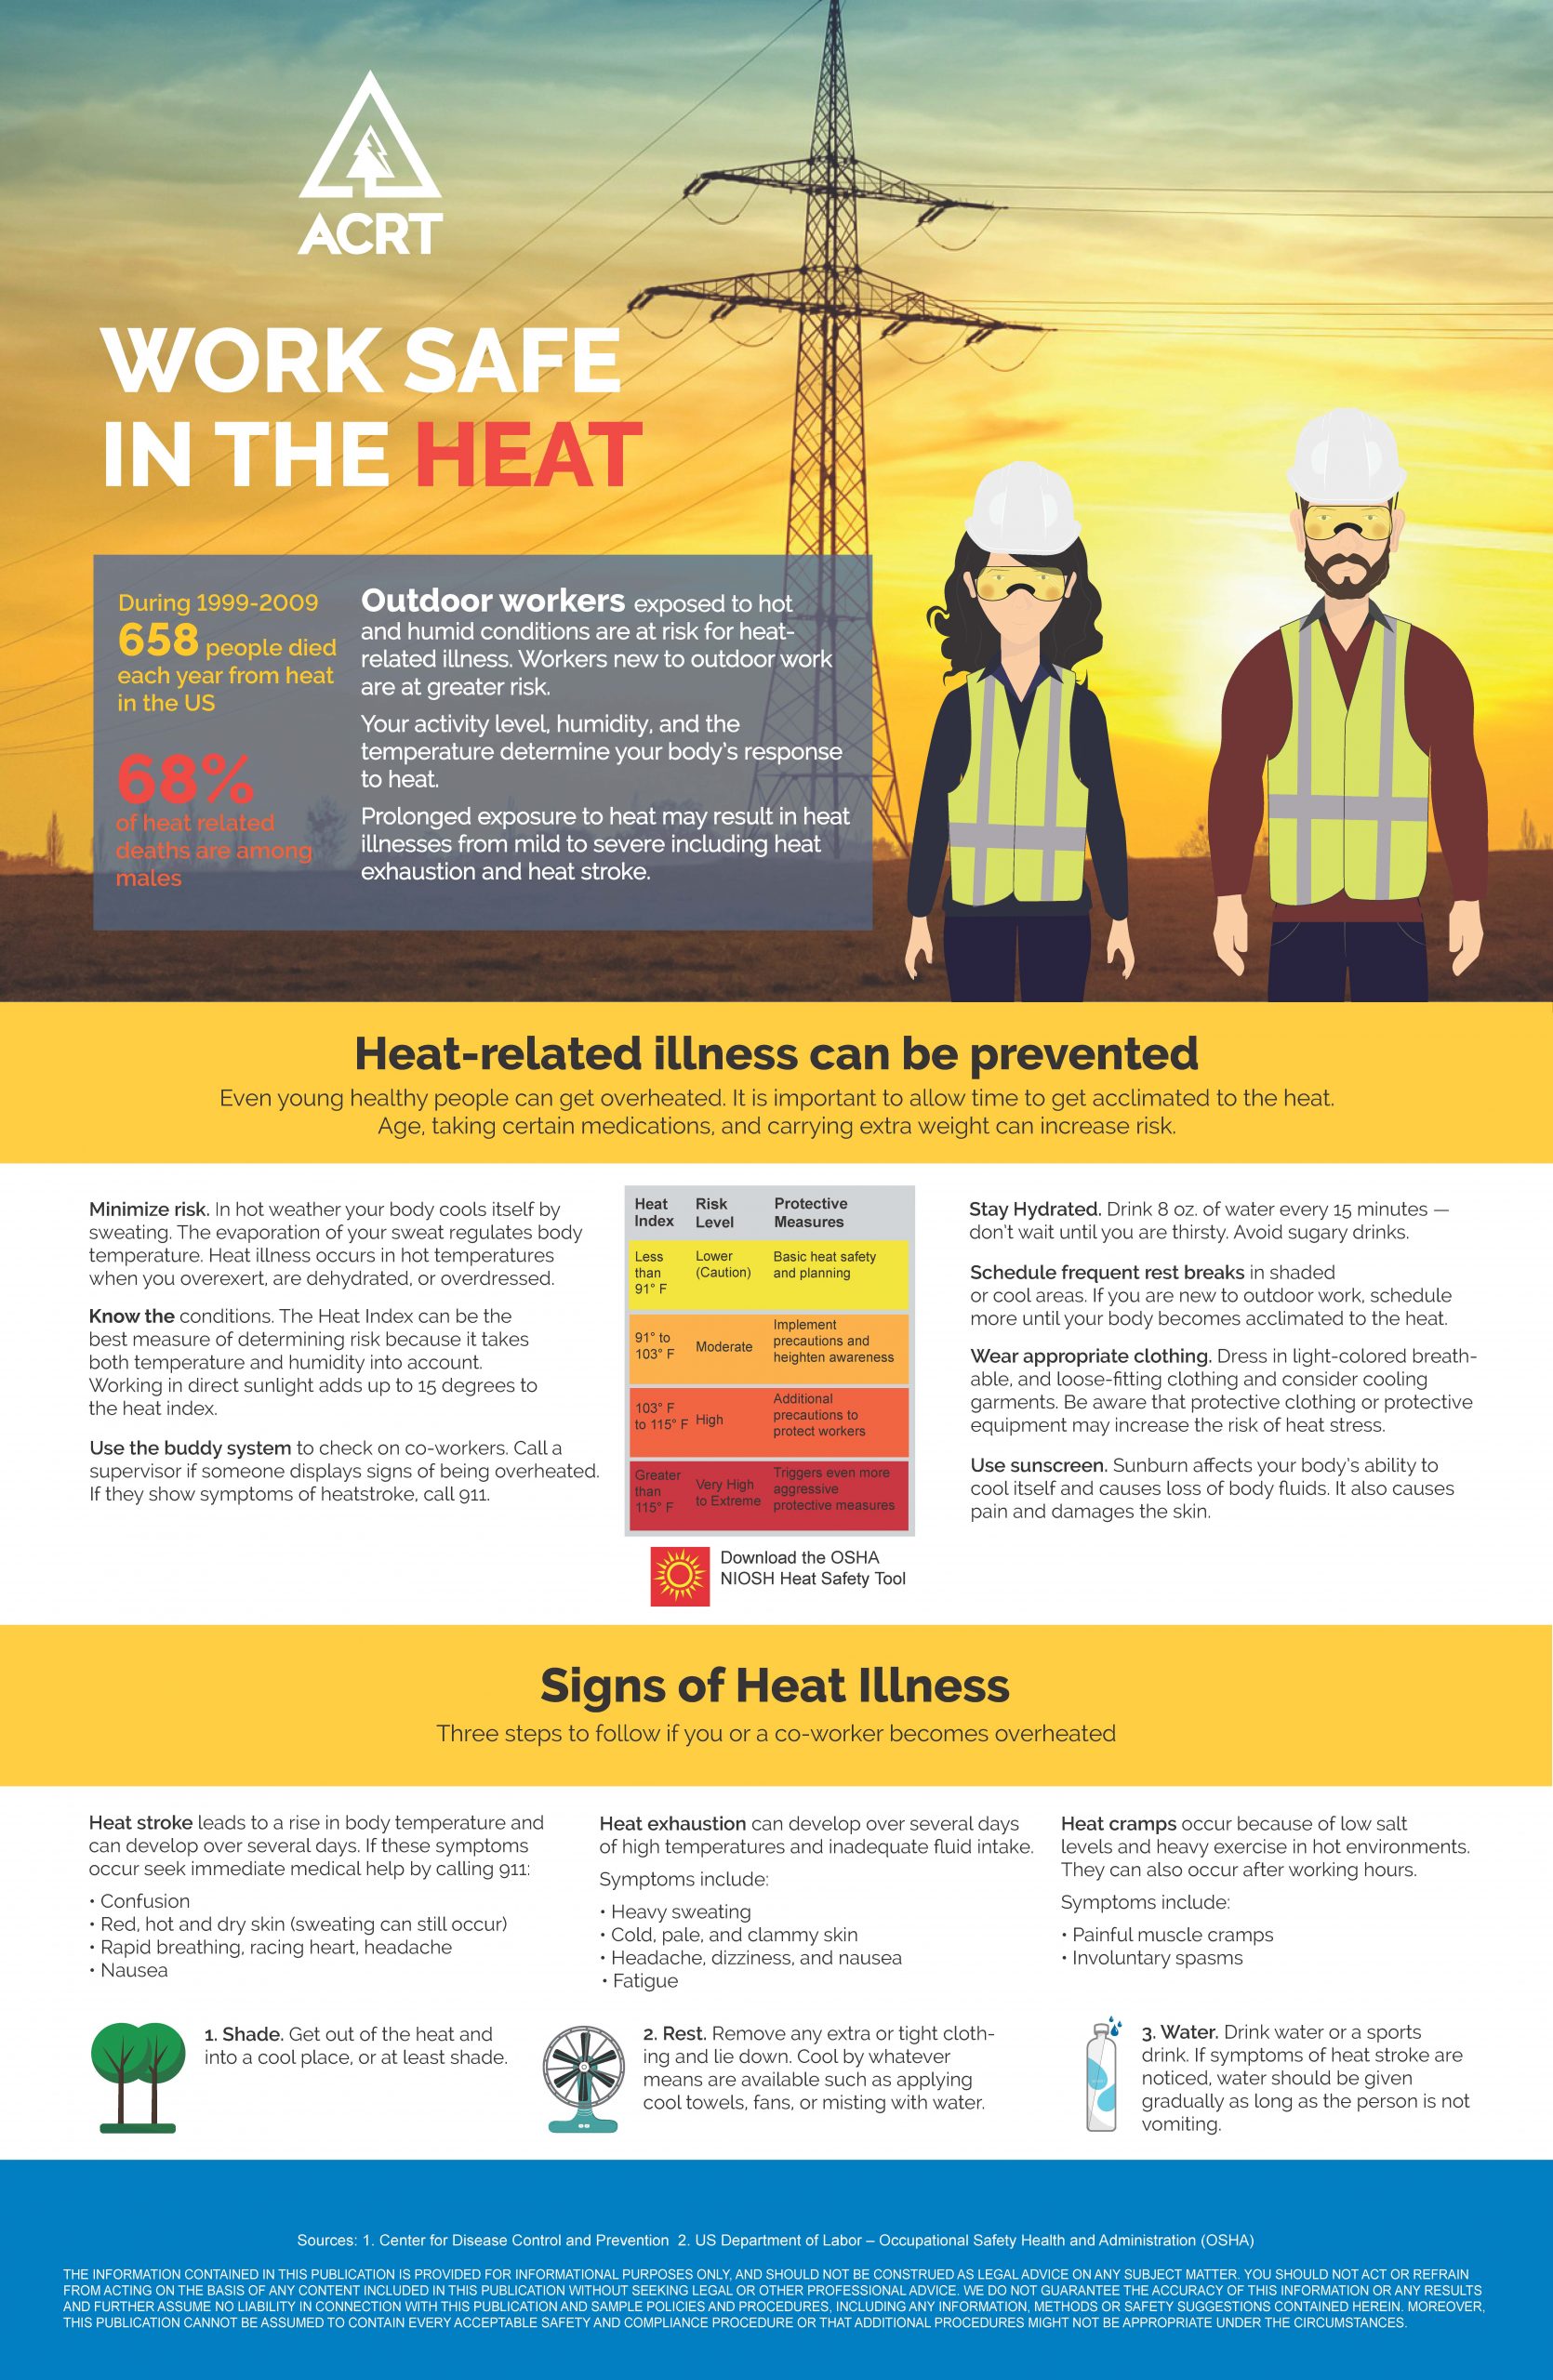 Practice Safety in the Heat